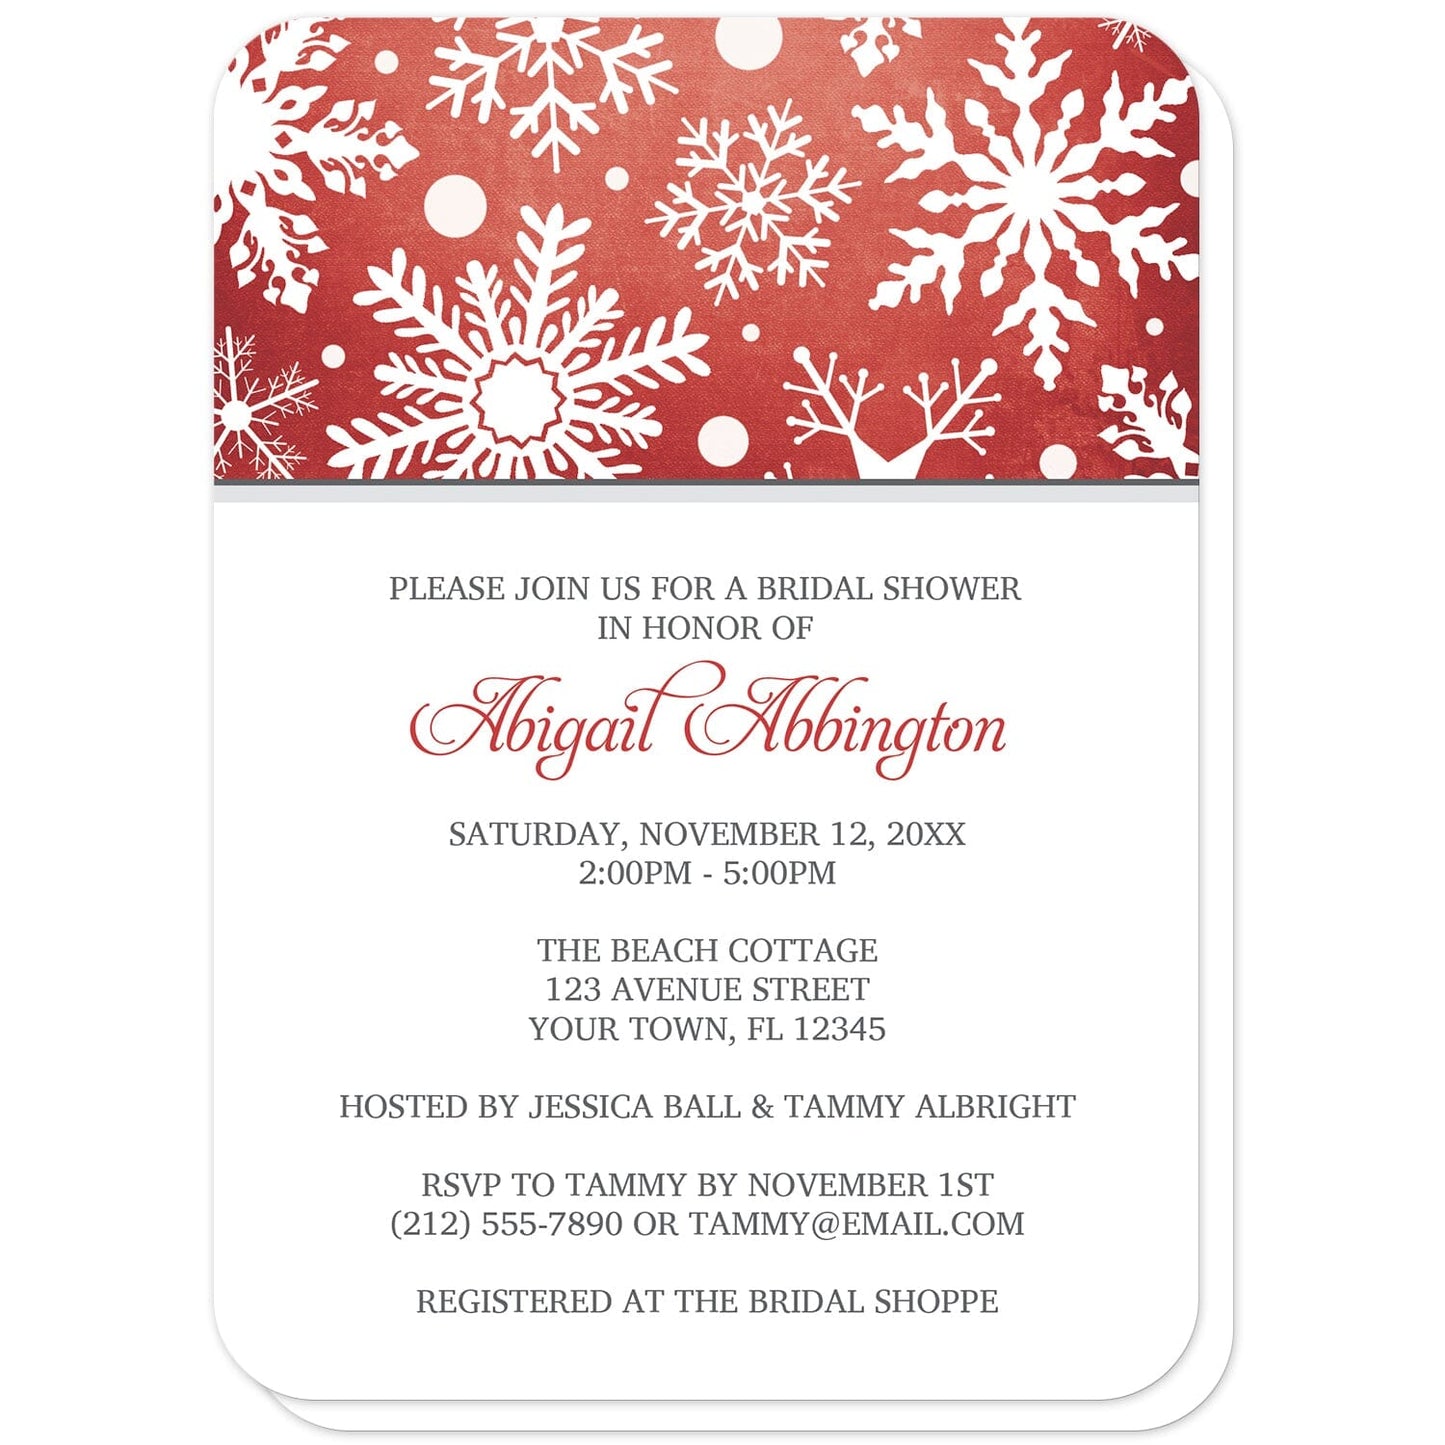 Winter Snowflake Red Gray Bridal Shower Invitations (with rounded corners) at Artistically Invited. Modern winter snowflake red gray bridal shower invitations designed with a white snowflakes pattern over an organic red wintry background at the top of the invitations. Your personalized bridal shower celebration details are custom printed in red and gray on white below the snowflakes. 